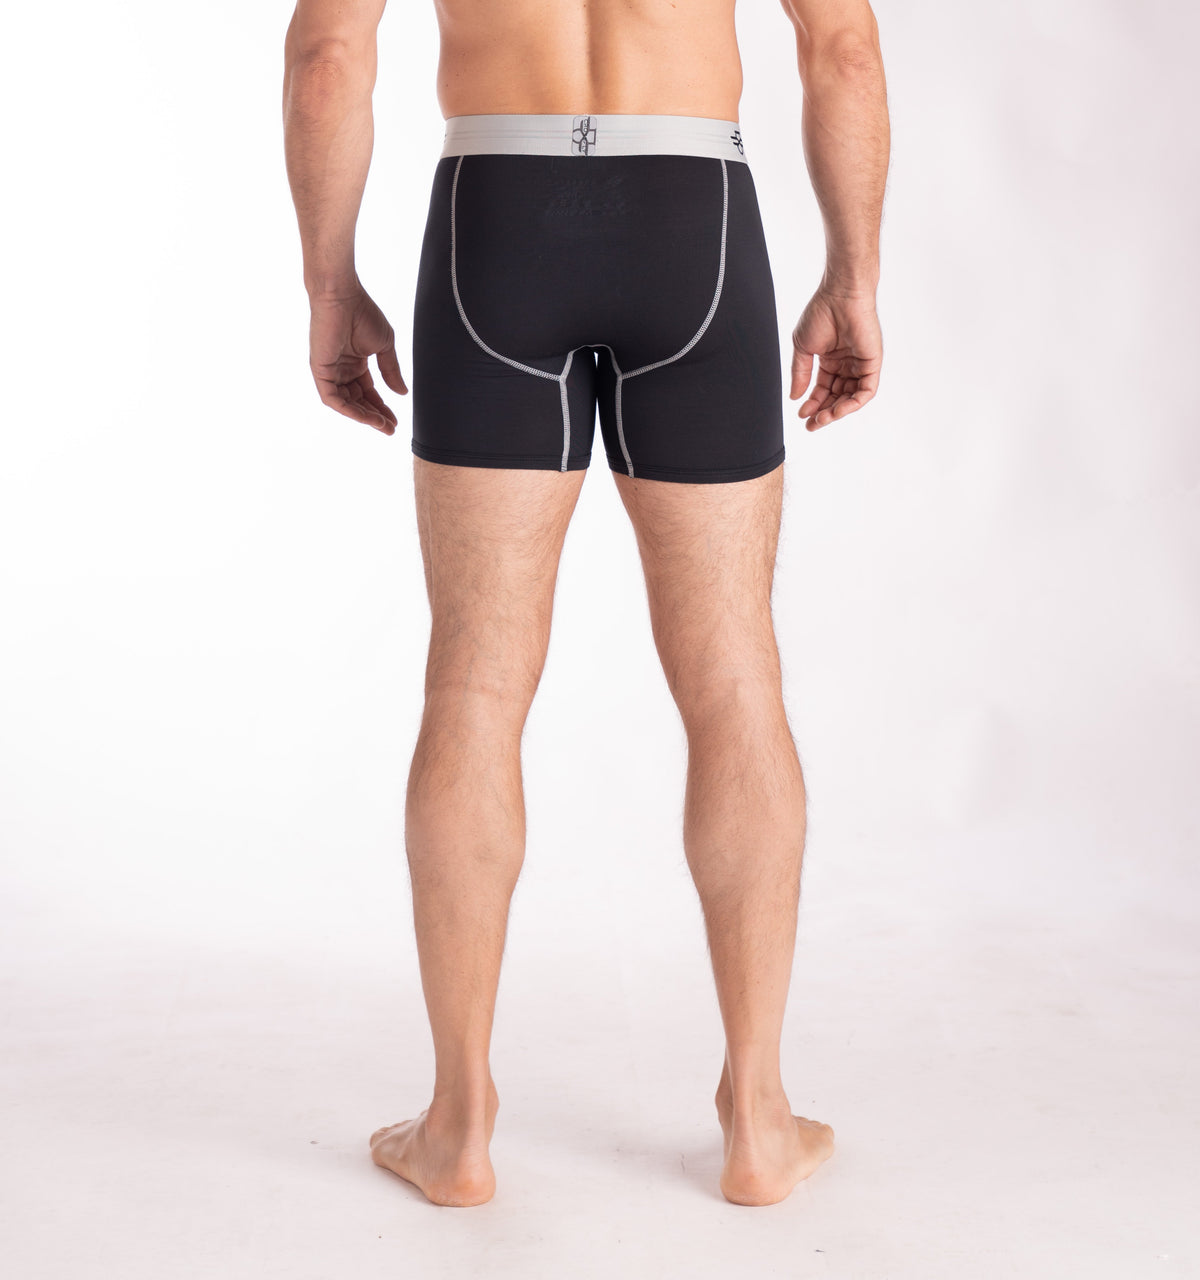 Crossfly men&#39;s IKON X 6&quot; black / silver boxers from the Everyday series, featuring X-Fly and Coccoon internal pocket support.